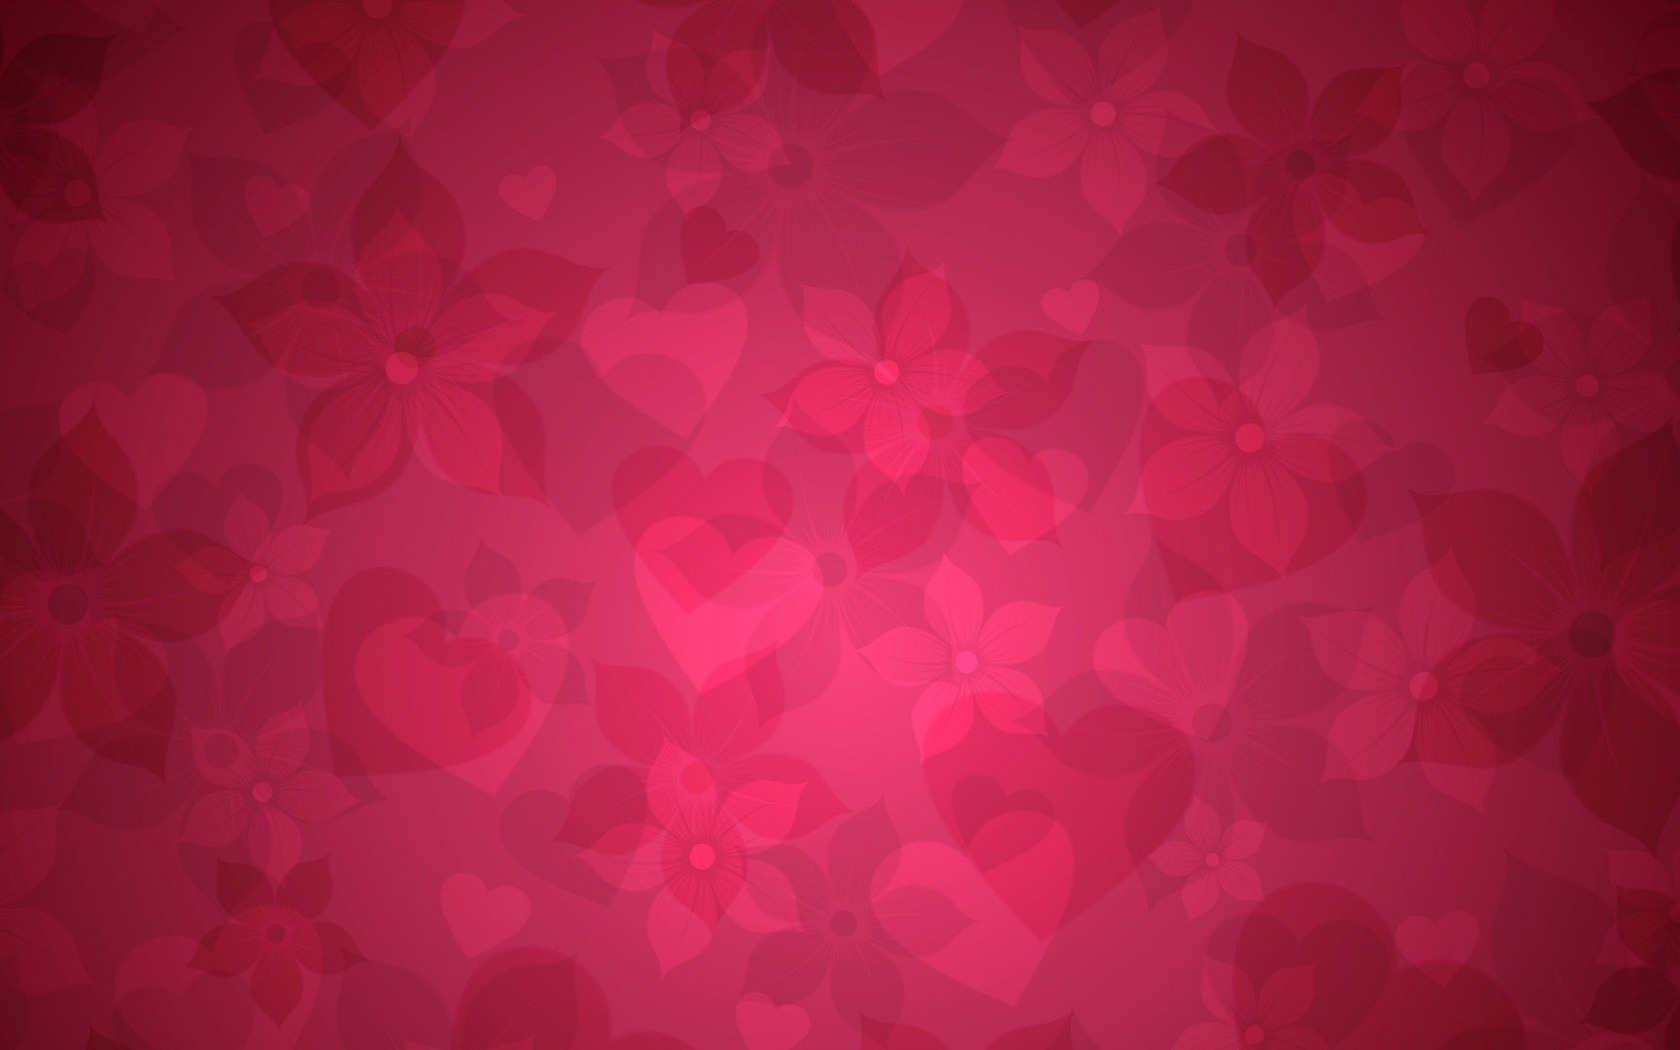 Hearts And Flowers Wallpaper